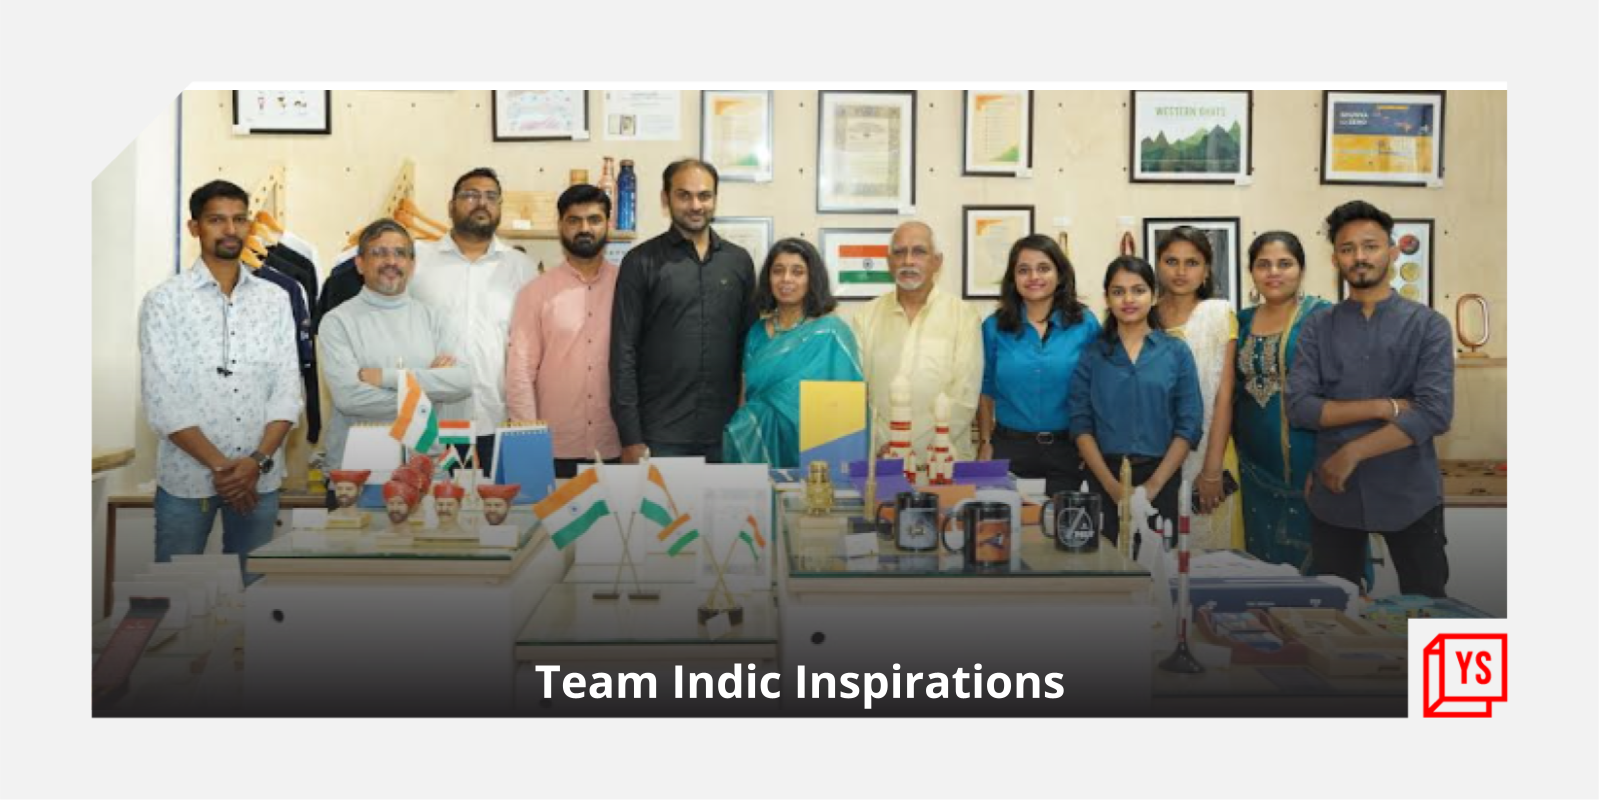 How this Pune D2C startup fills the gap for new-age Indic collectables, souvenirs, and merchandise